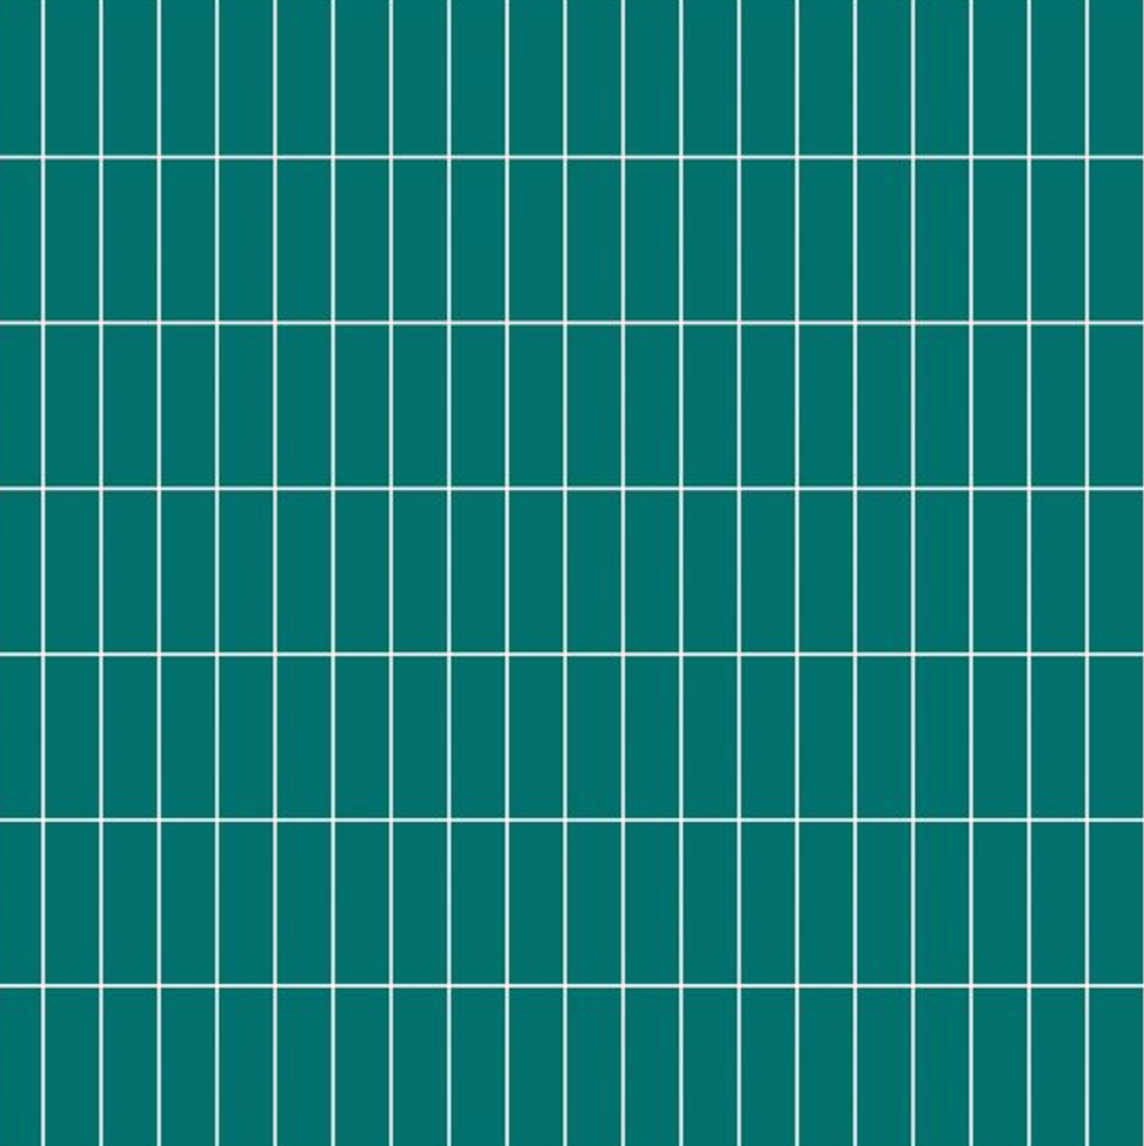 Showerwall Acrylic Patterns & Tiles Collection  - Vertical Tile Teal